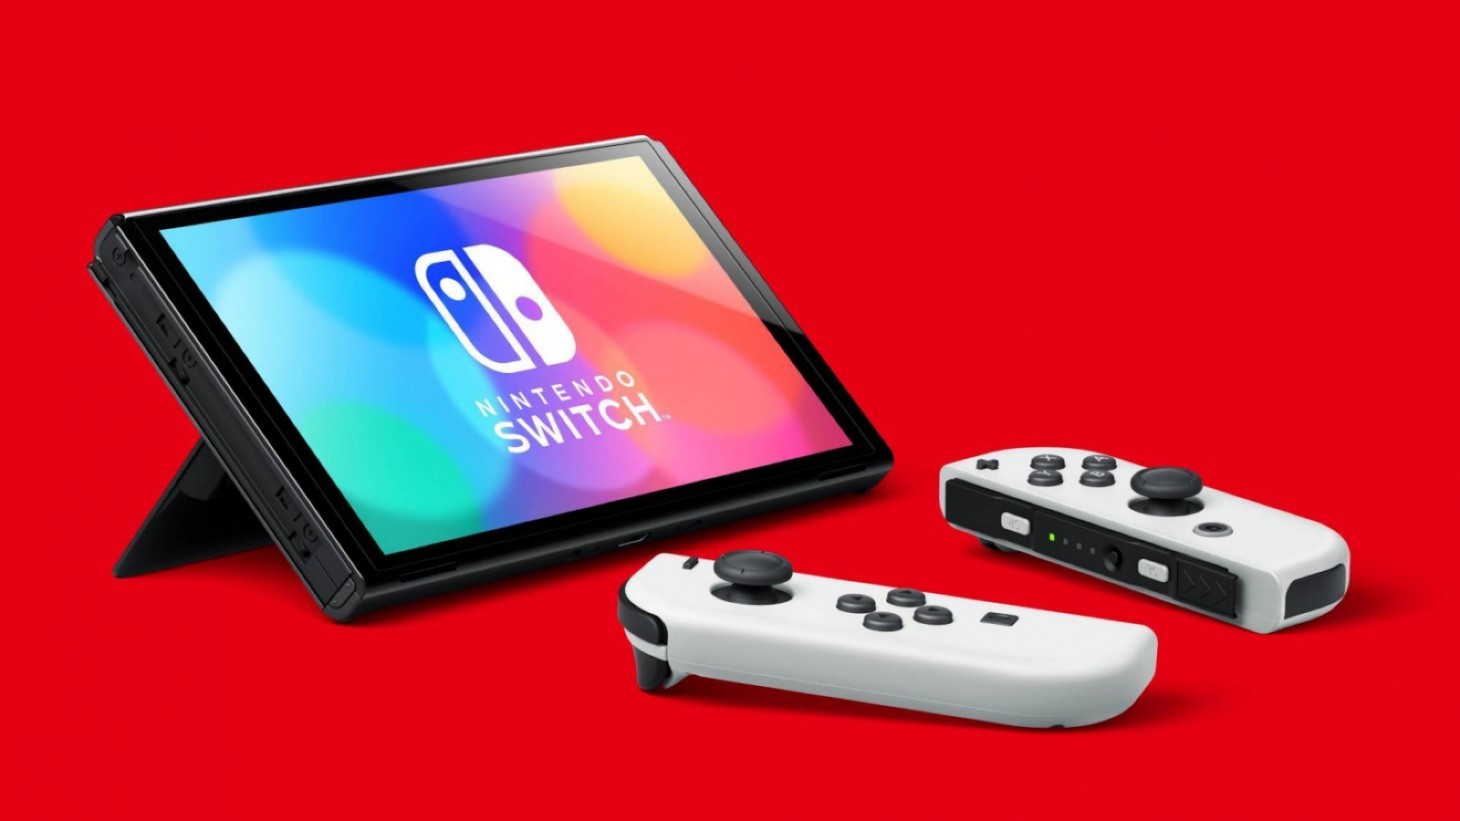 Nintendo Hints It Will Continue Extensive Switch Support, Even